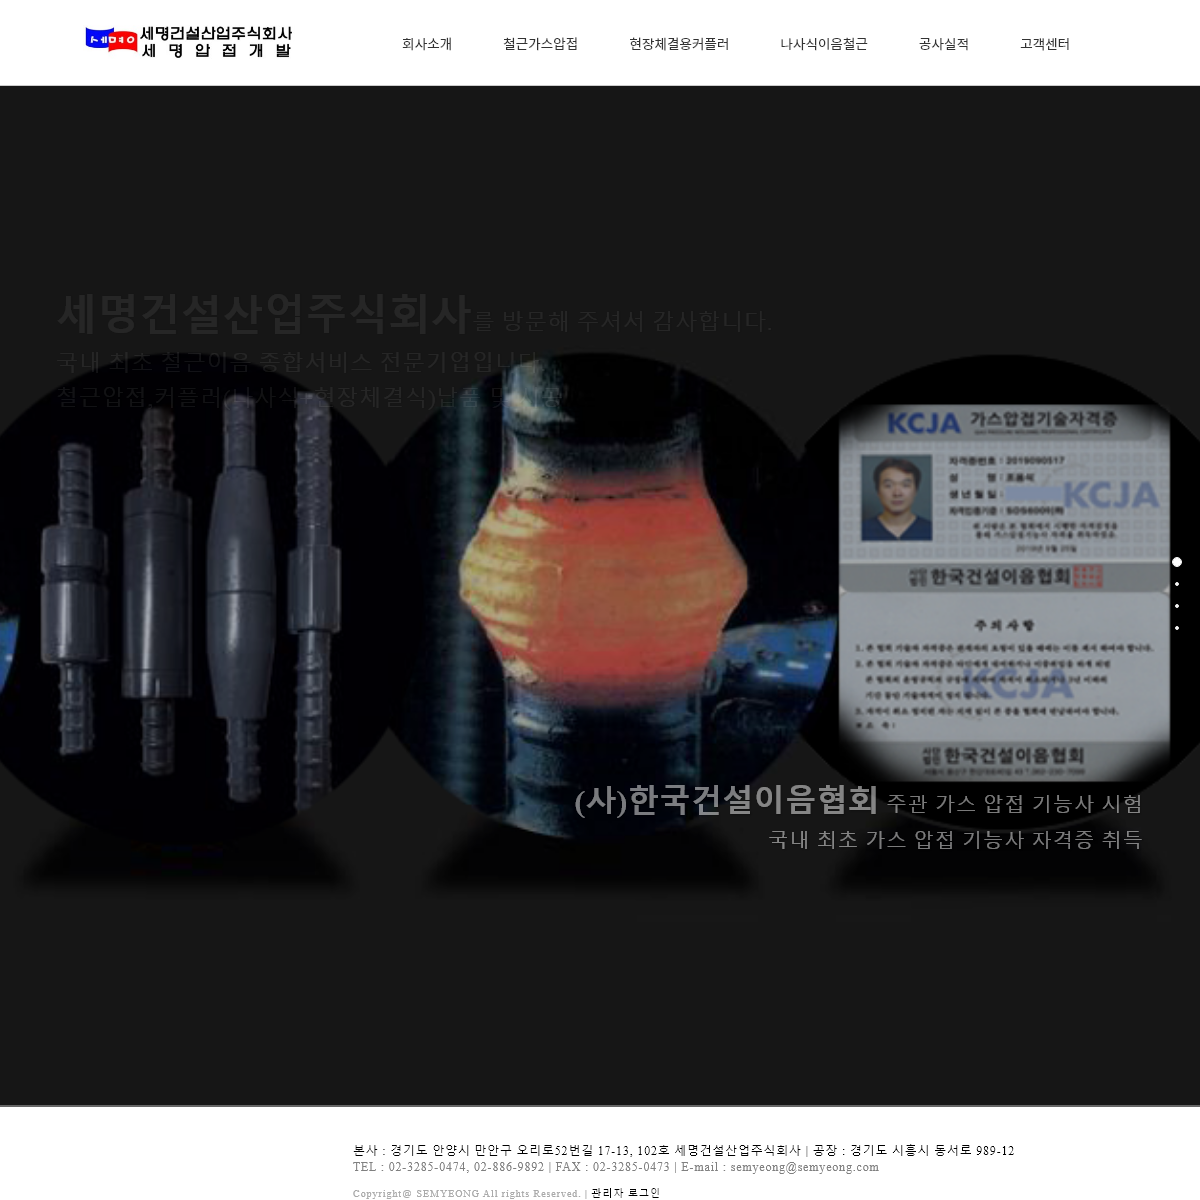 A complete backup of semyeong.com